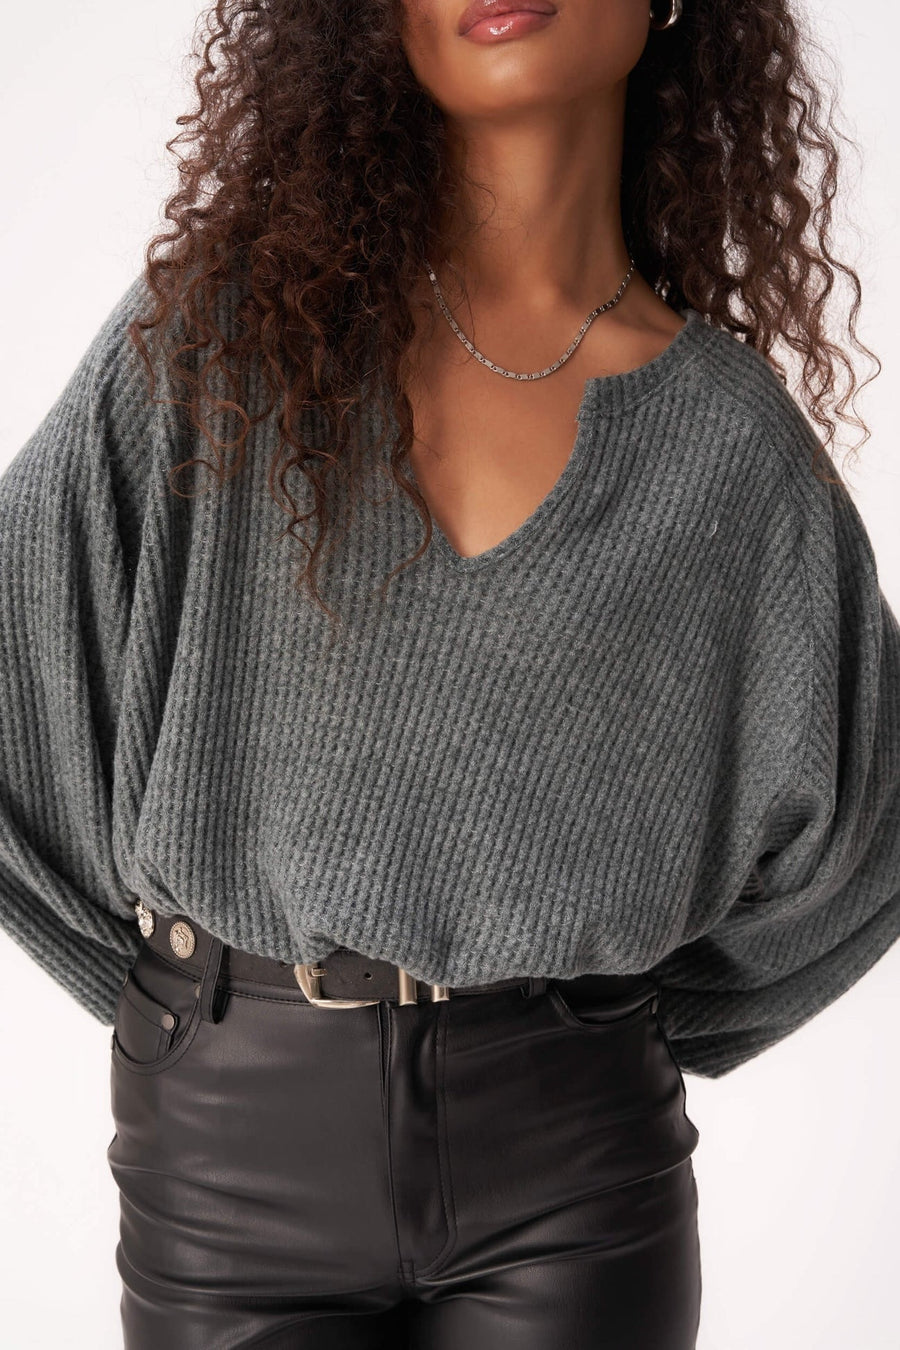 MOXIE COZY THERMAL BUBBLE TOP by Project Social T - MIDNIGHT EMERALD - Blue Sky Fashions & Lingerie